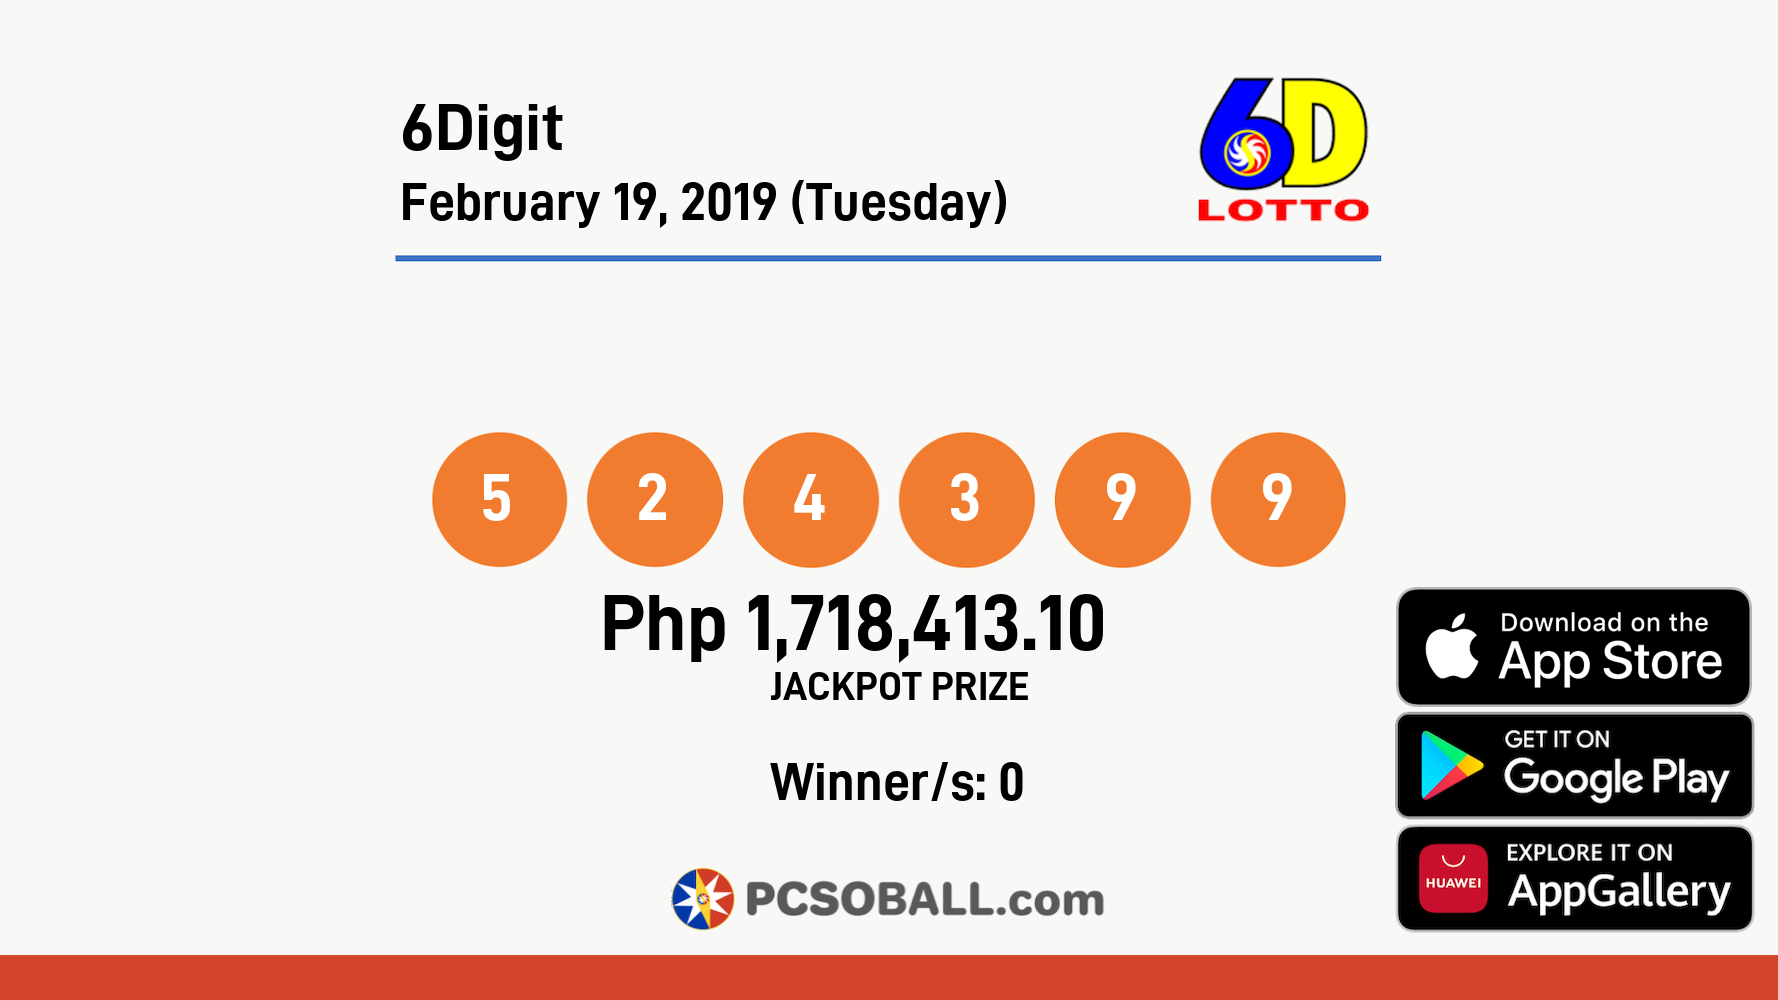 6Digit February 19, 2019 (Tuesday) Result